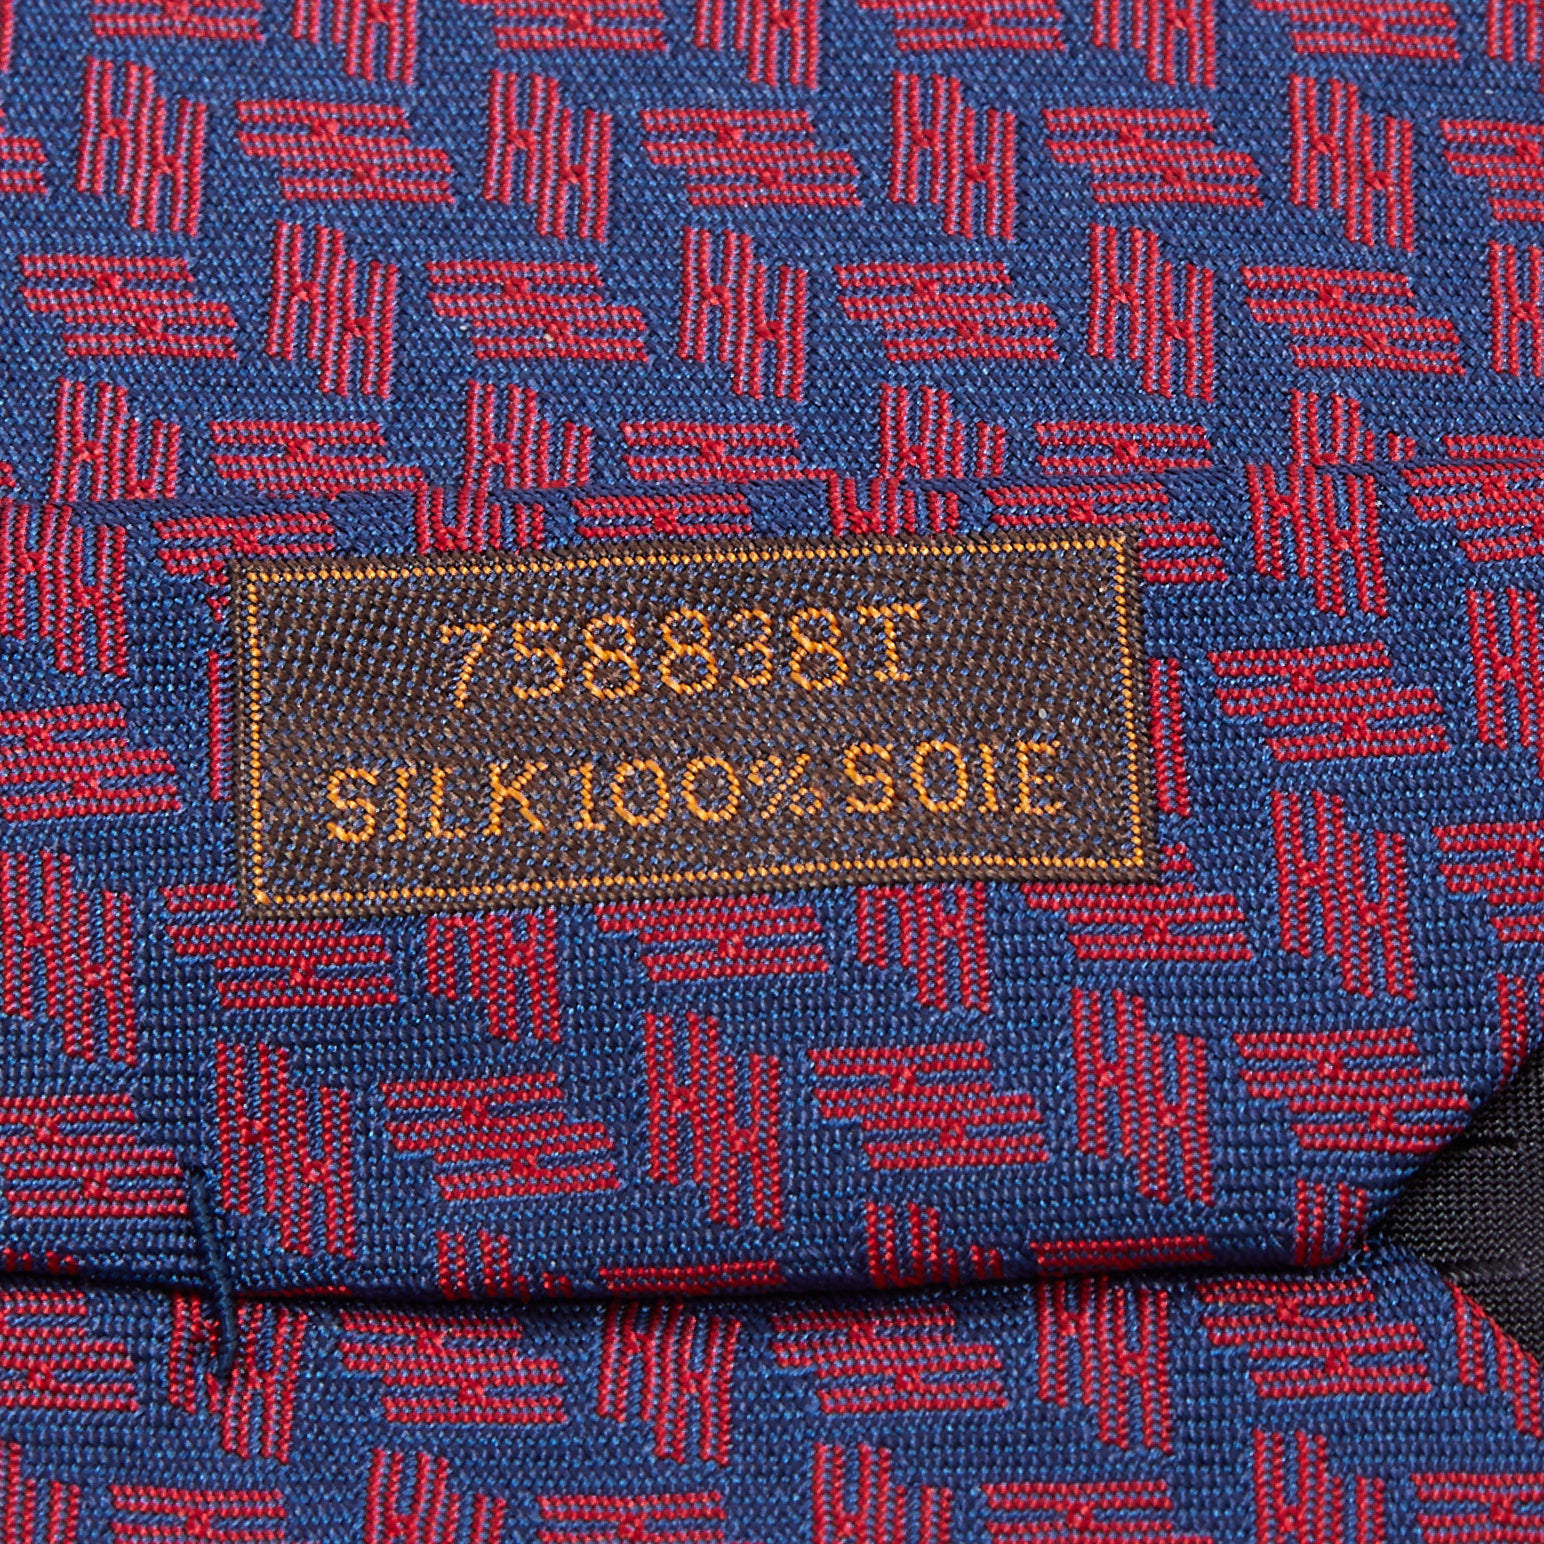 Hermes Ropes & Rings Silk Twill Tie Navy Blue Red 668 OA